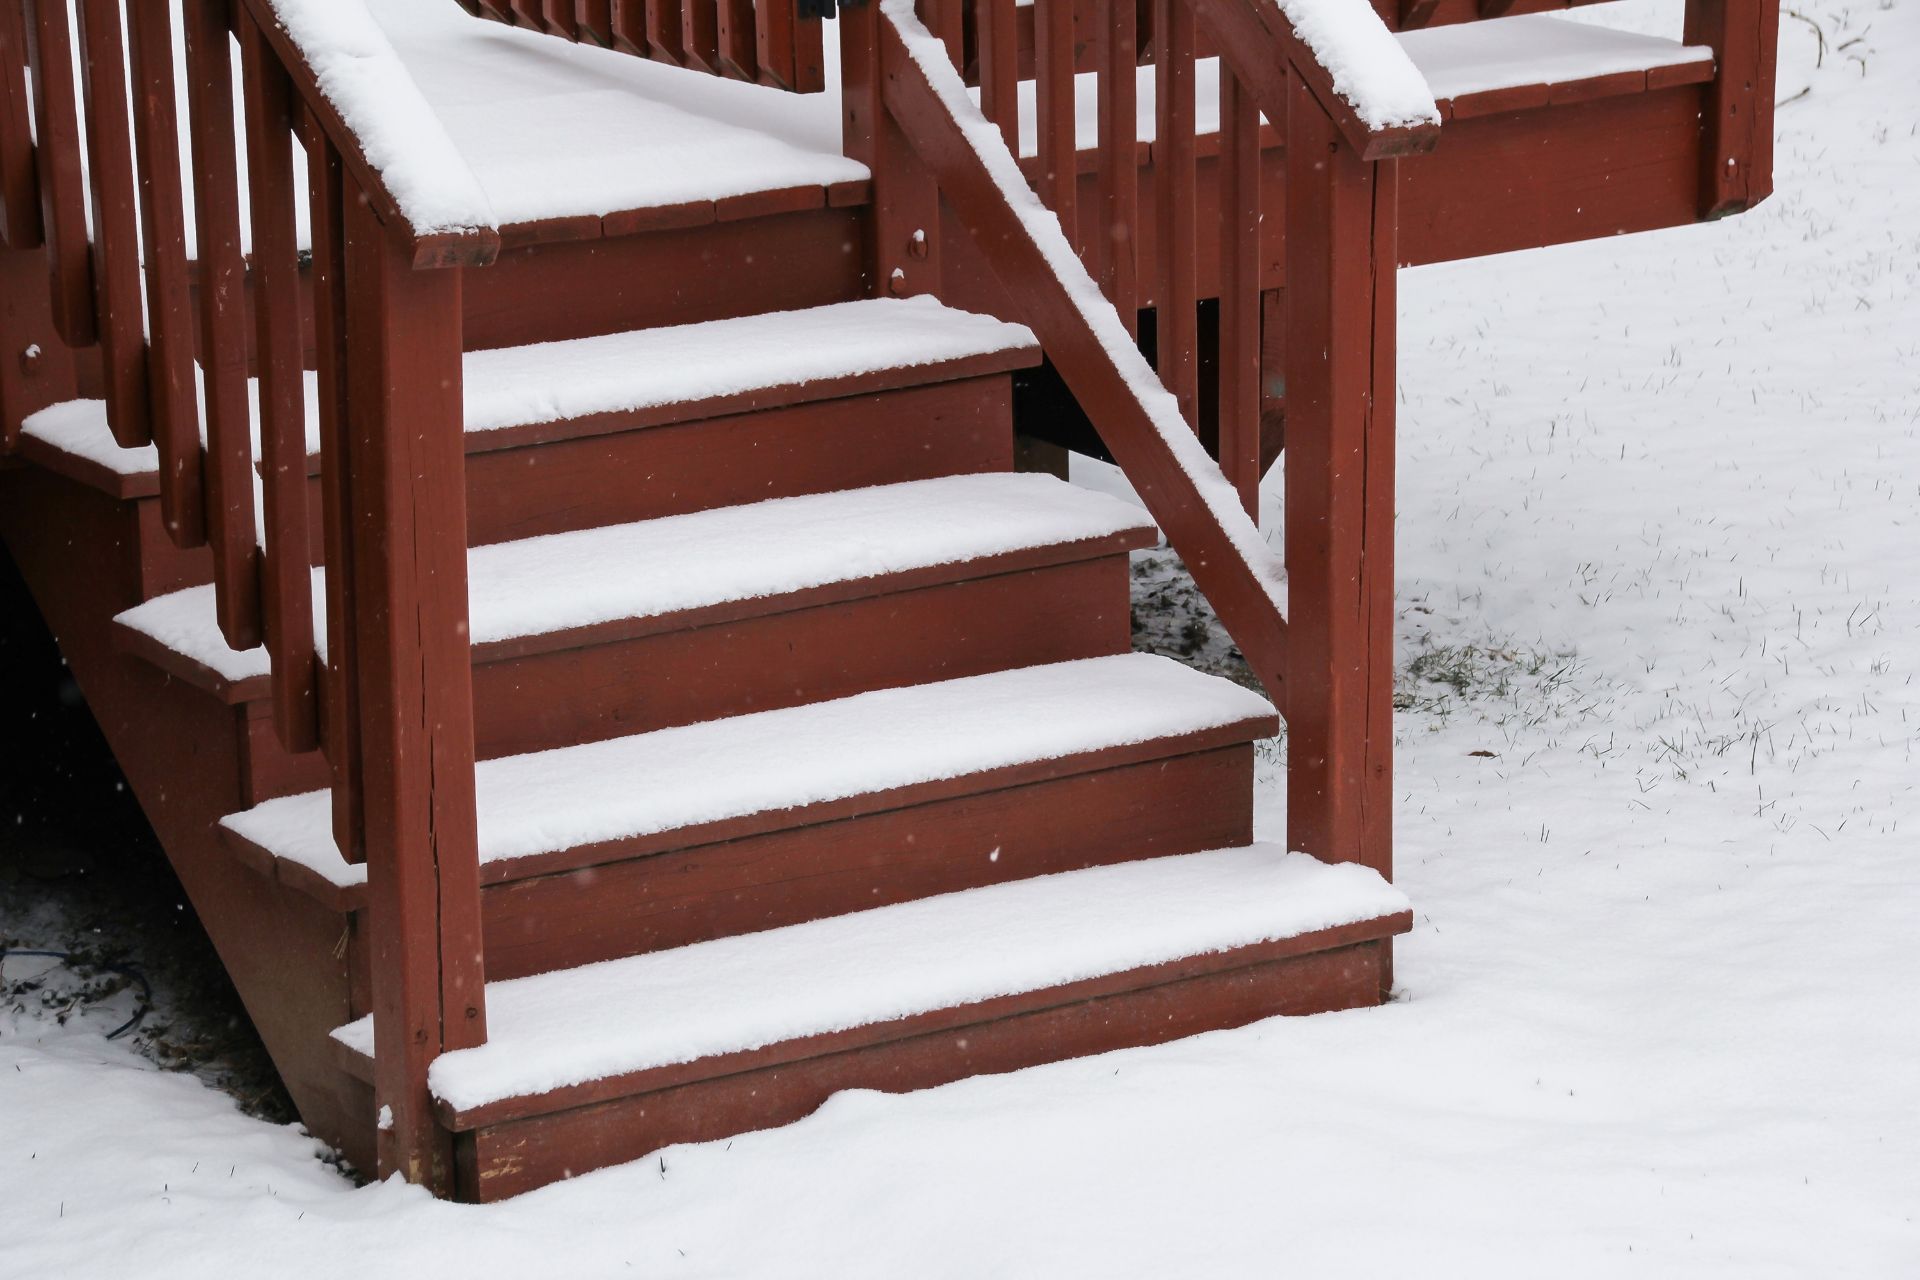 Fresh snow blankets a brown wooden stairway of a deck in St. Paul, MN.